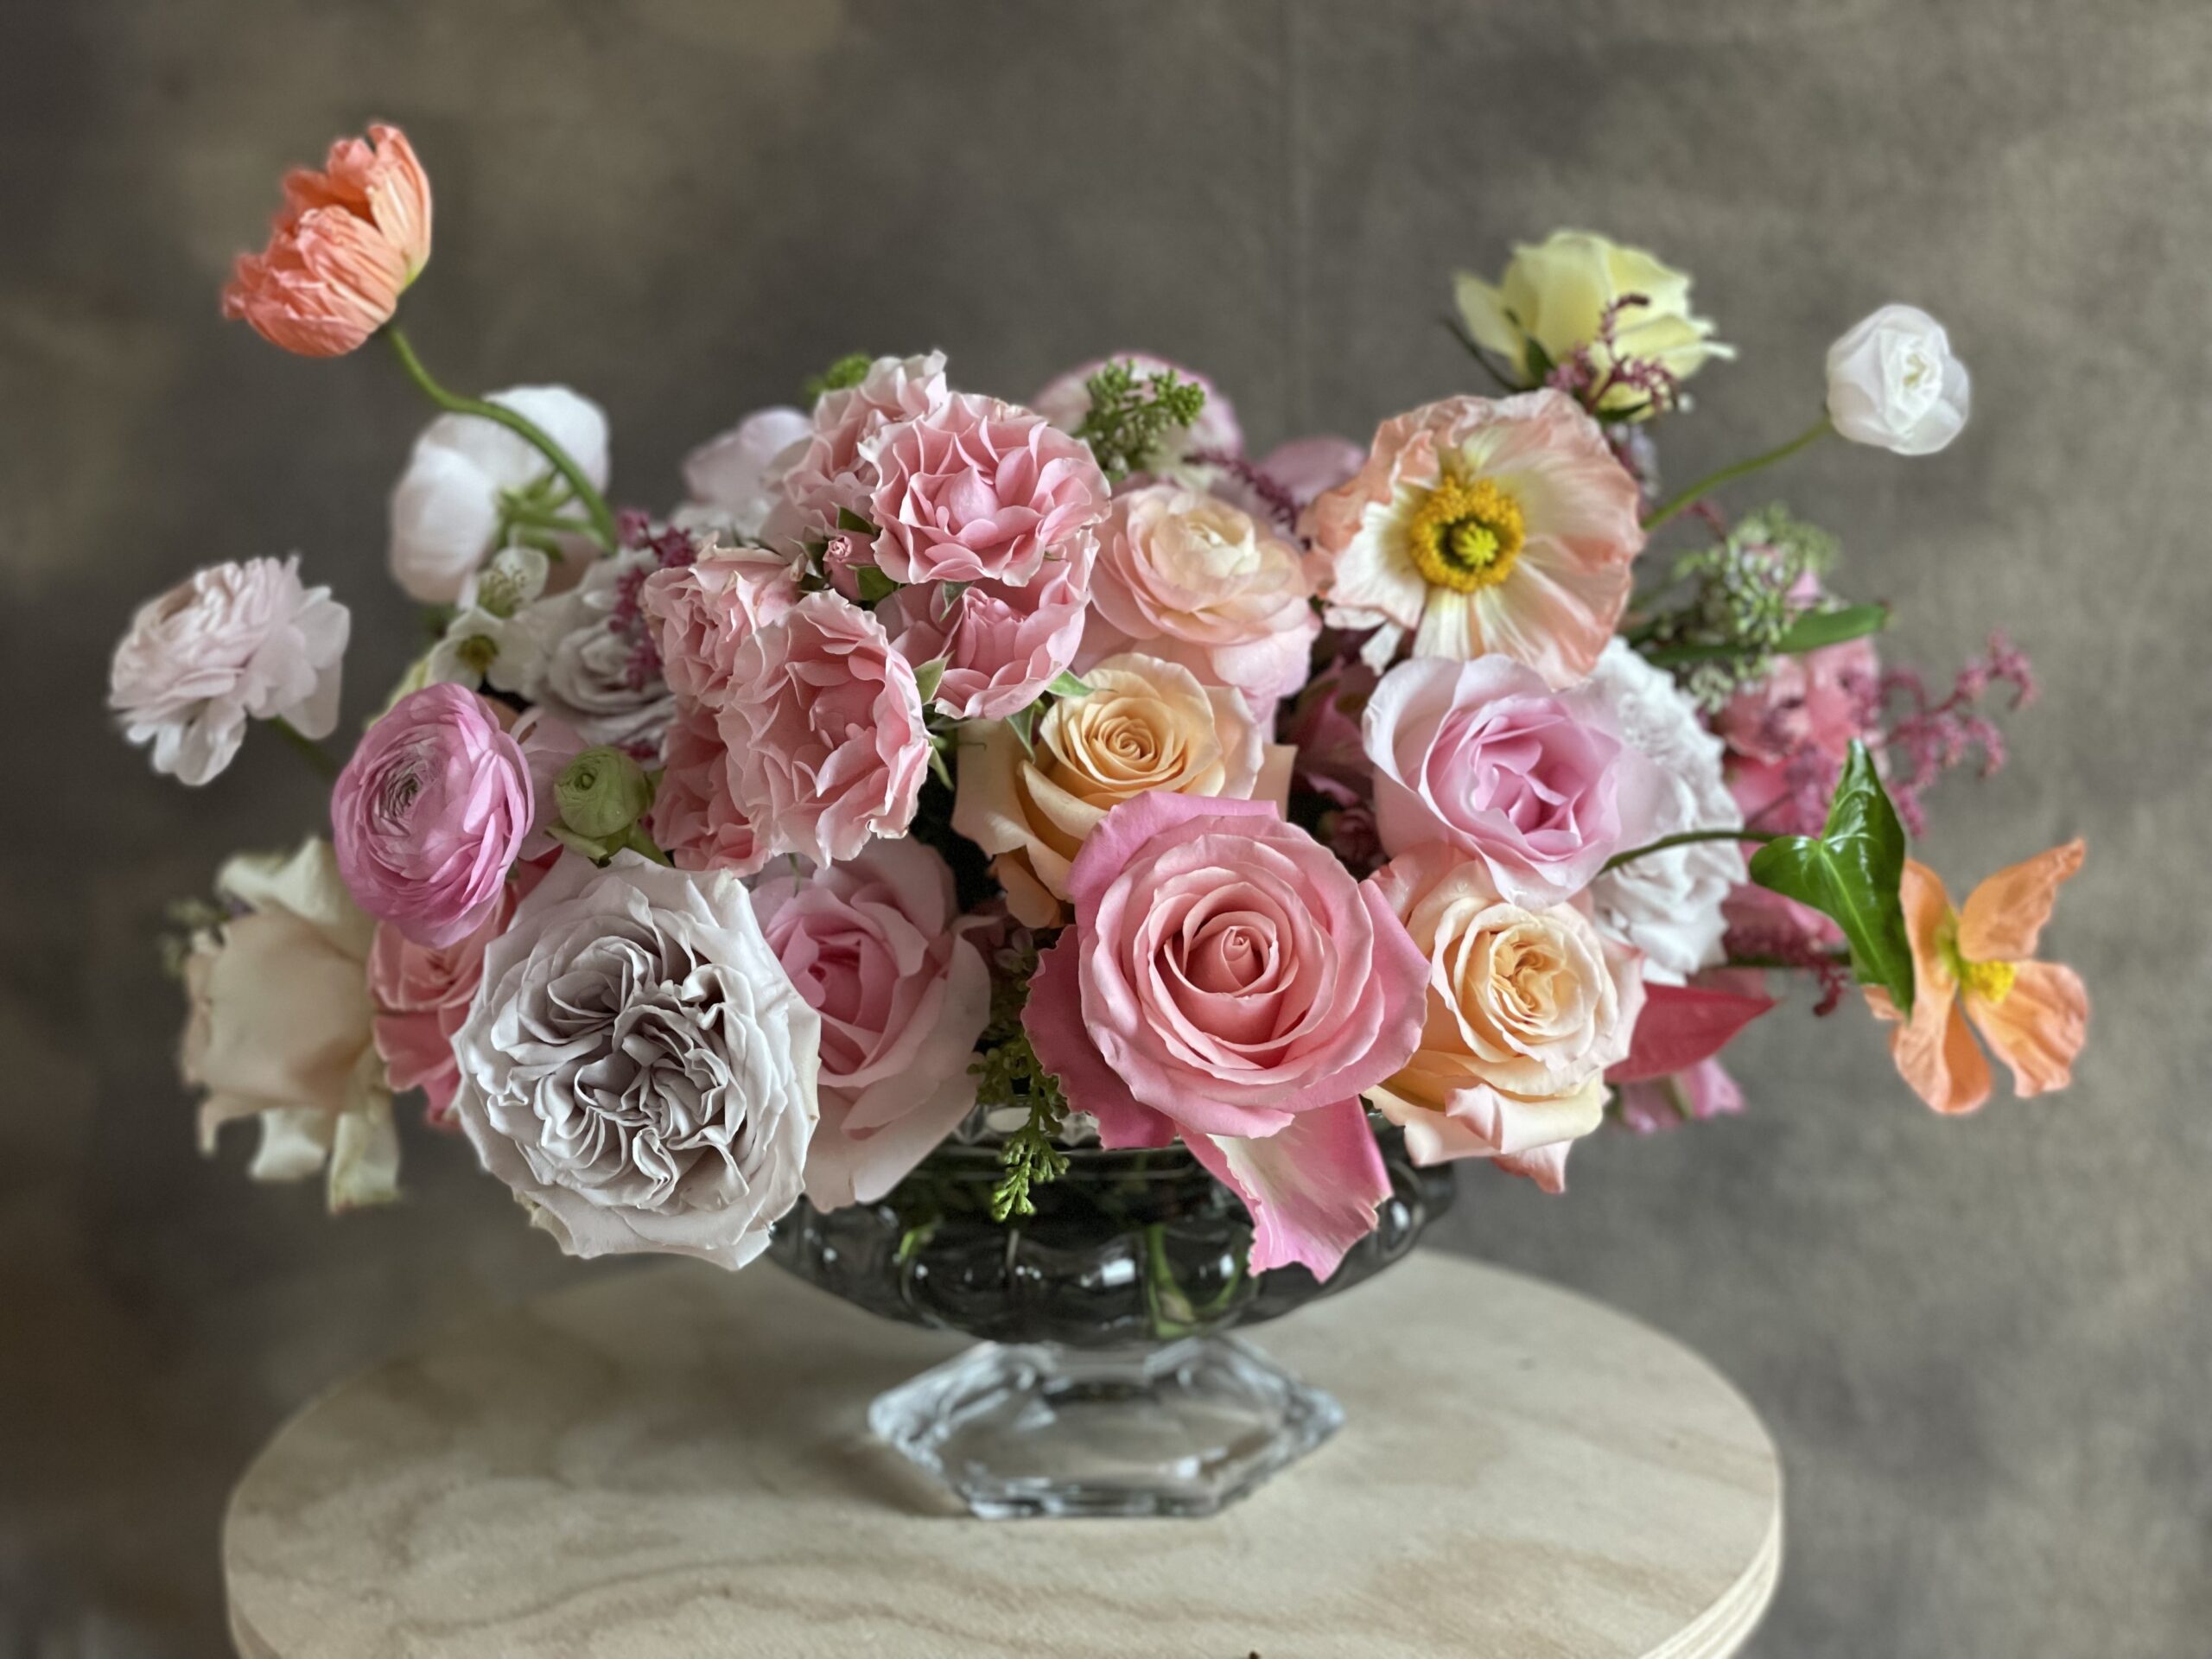 Pastel Blooms in a Compote Vase - Wild Bouquet